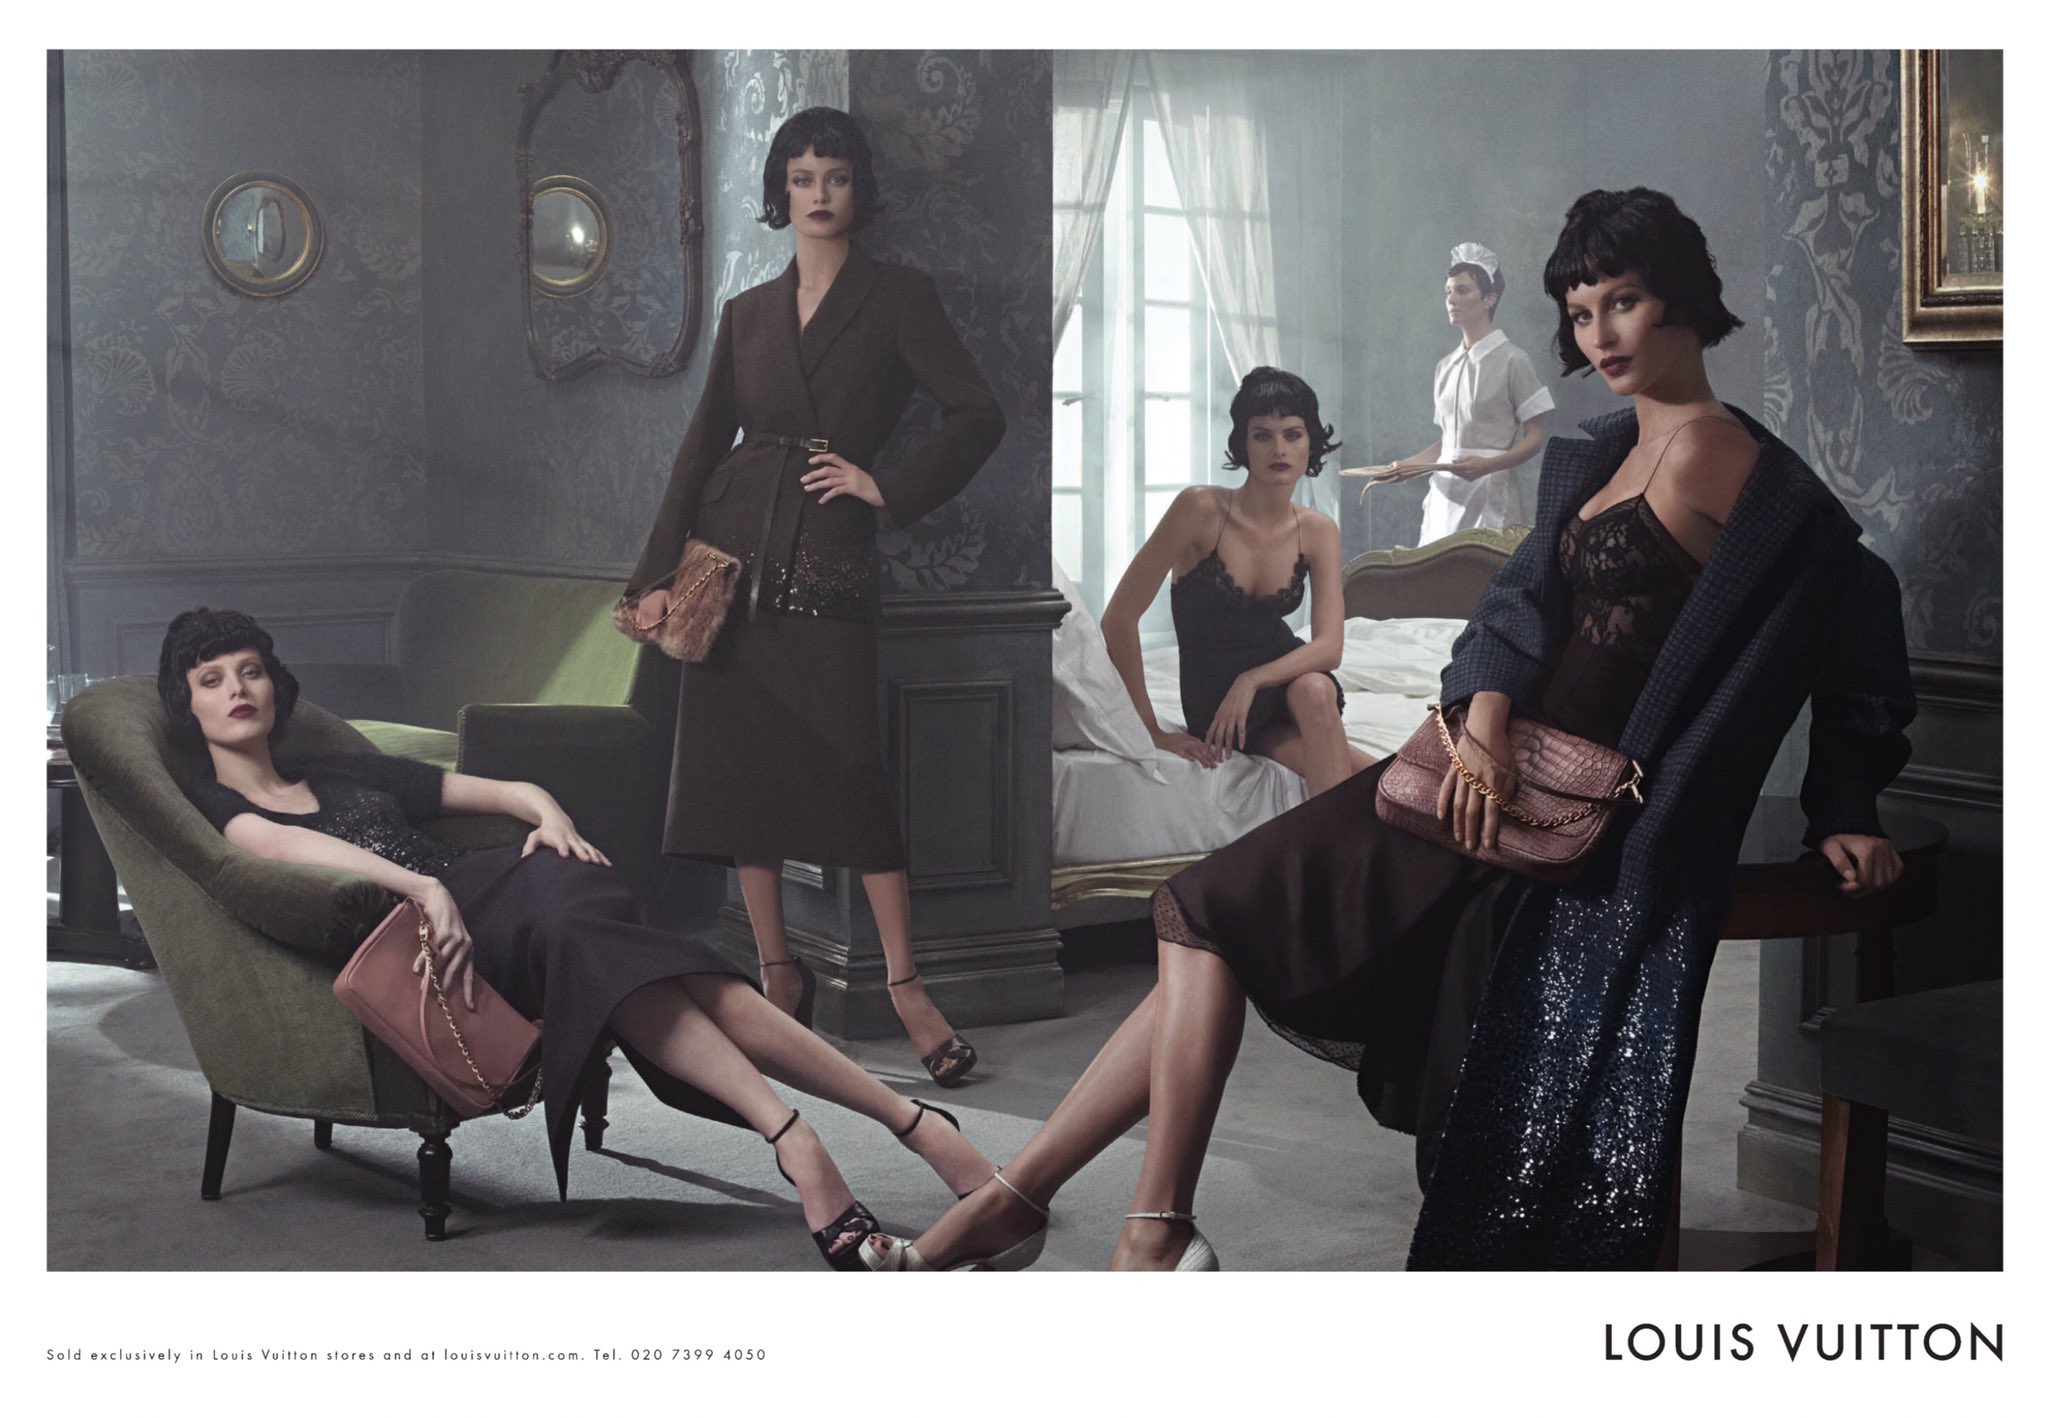 ً auf Twitter: "gisele bündchen, karen elson, carolyn murphy and isabeli fontana for louis by marc jacobs f/w 2013 campaign, photographed steven meisel / Twitter